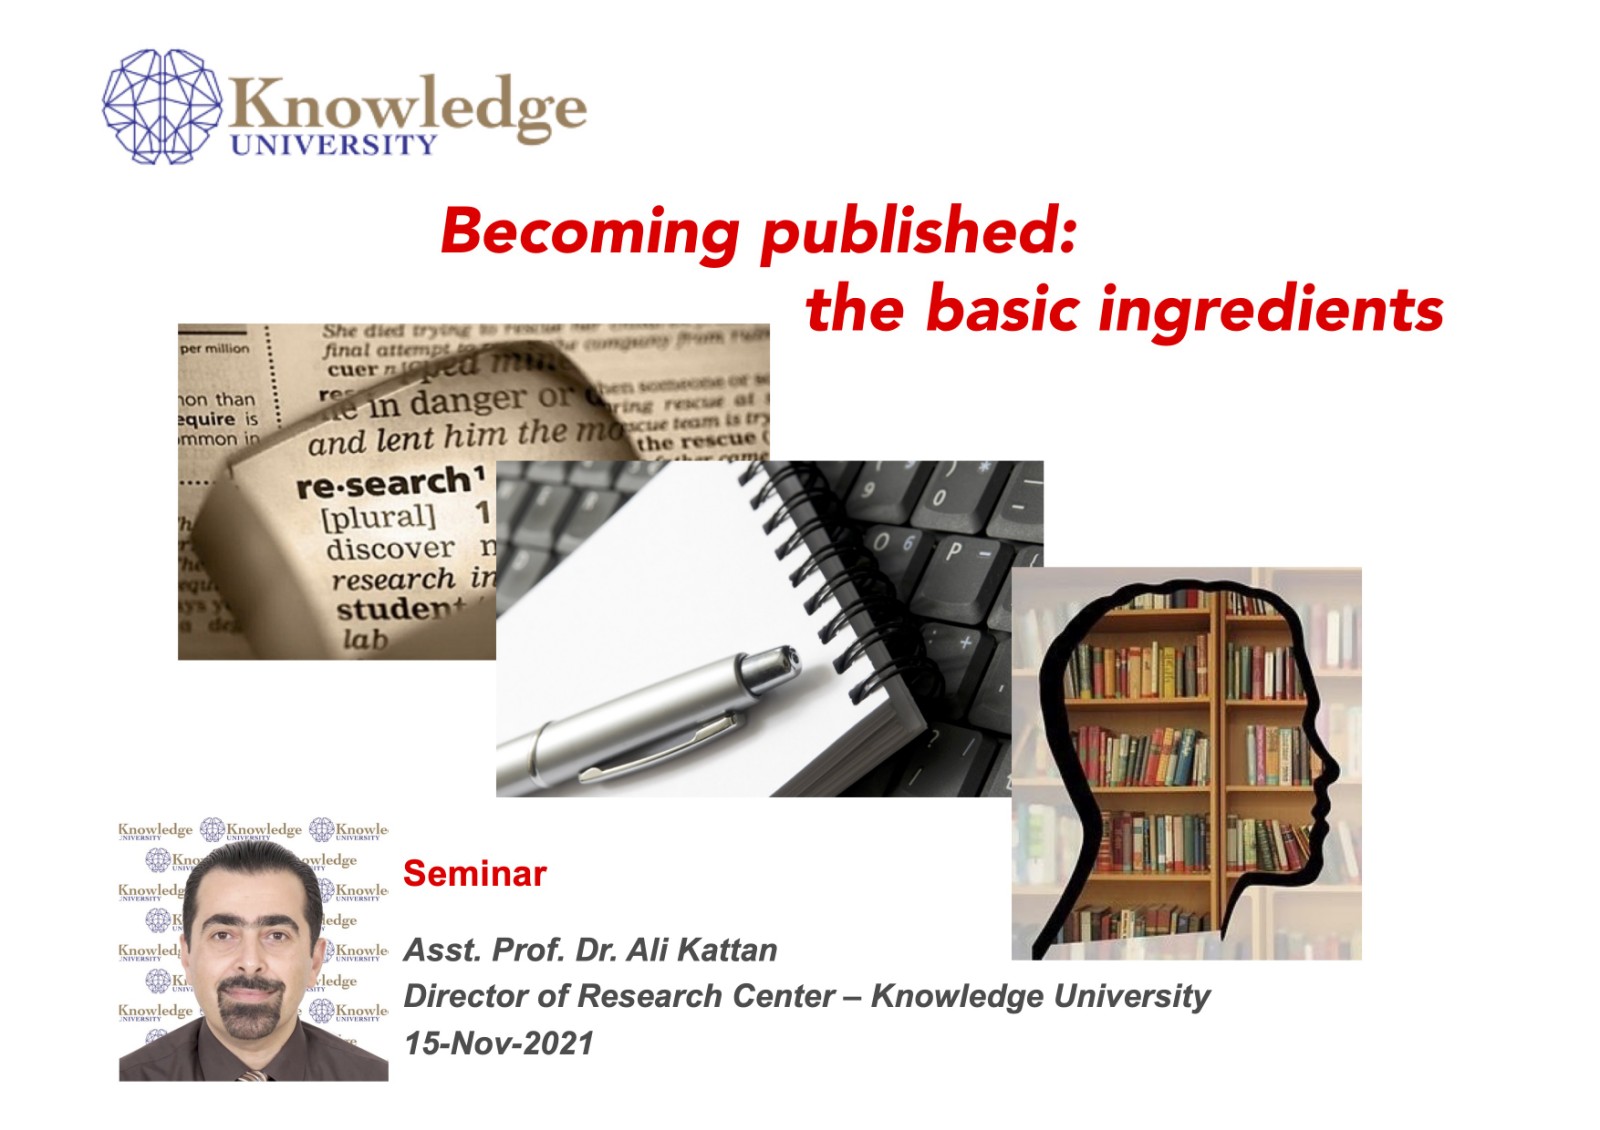 Becoming published: the basic ingredients